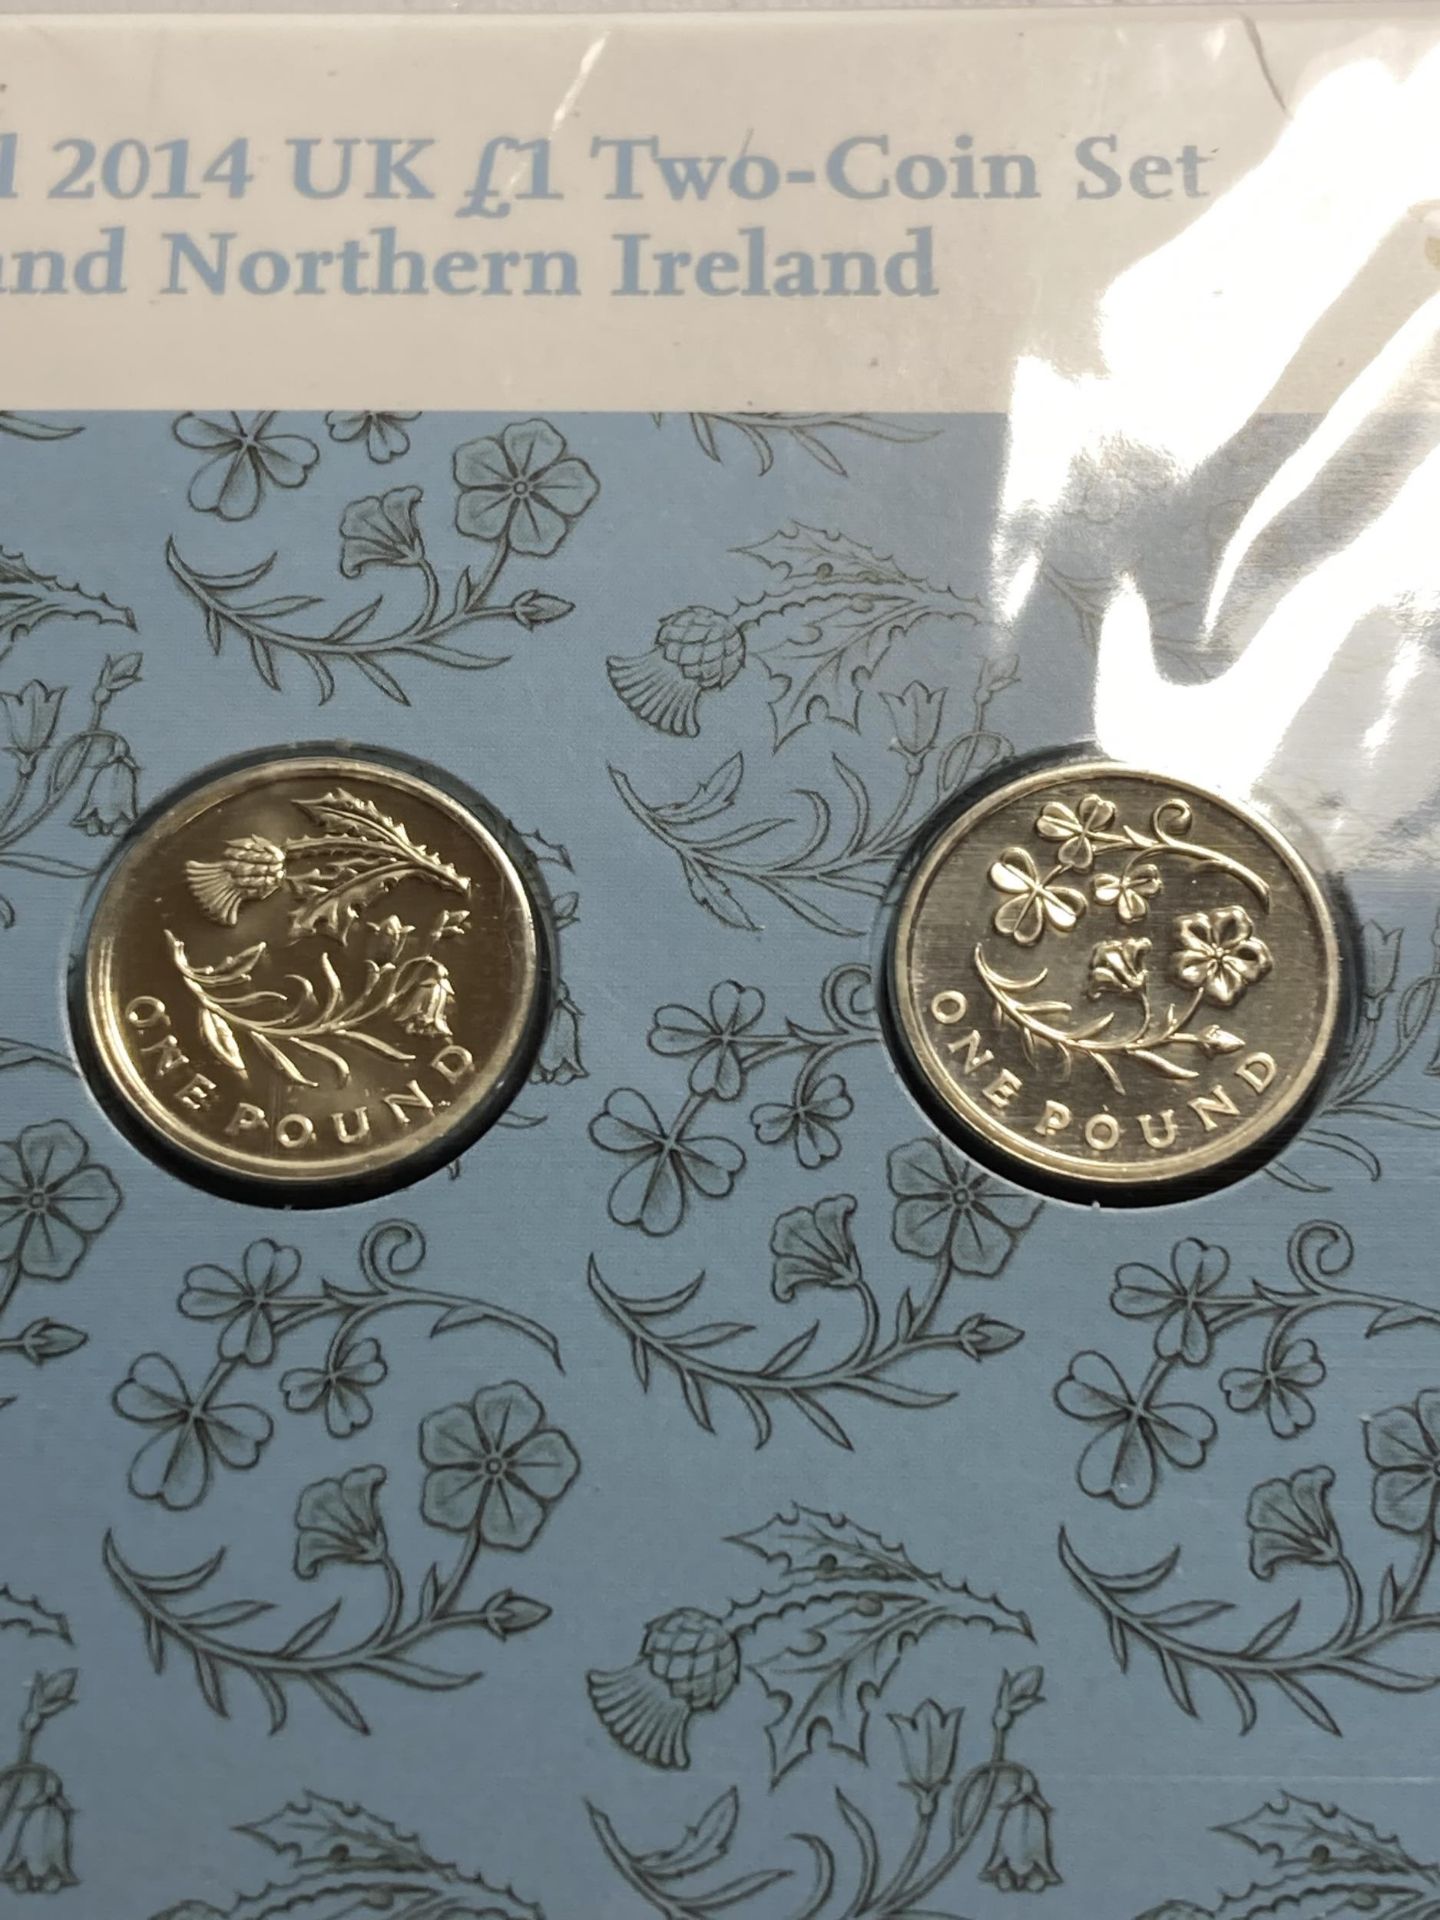 THE ROYAL MINT THE FLORAL 2014 UK £1 TWO COIN SETS SCOTLAND AND NORTHERN IRELAND - Bild 2 aus 2